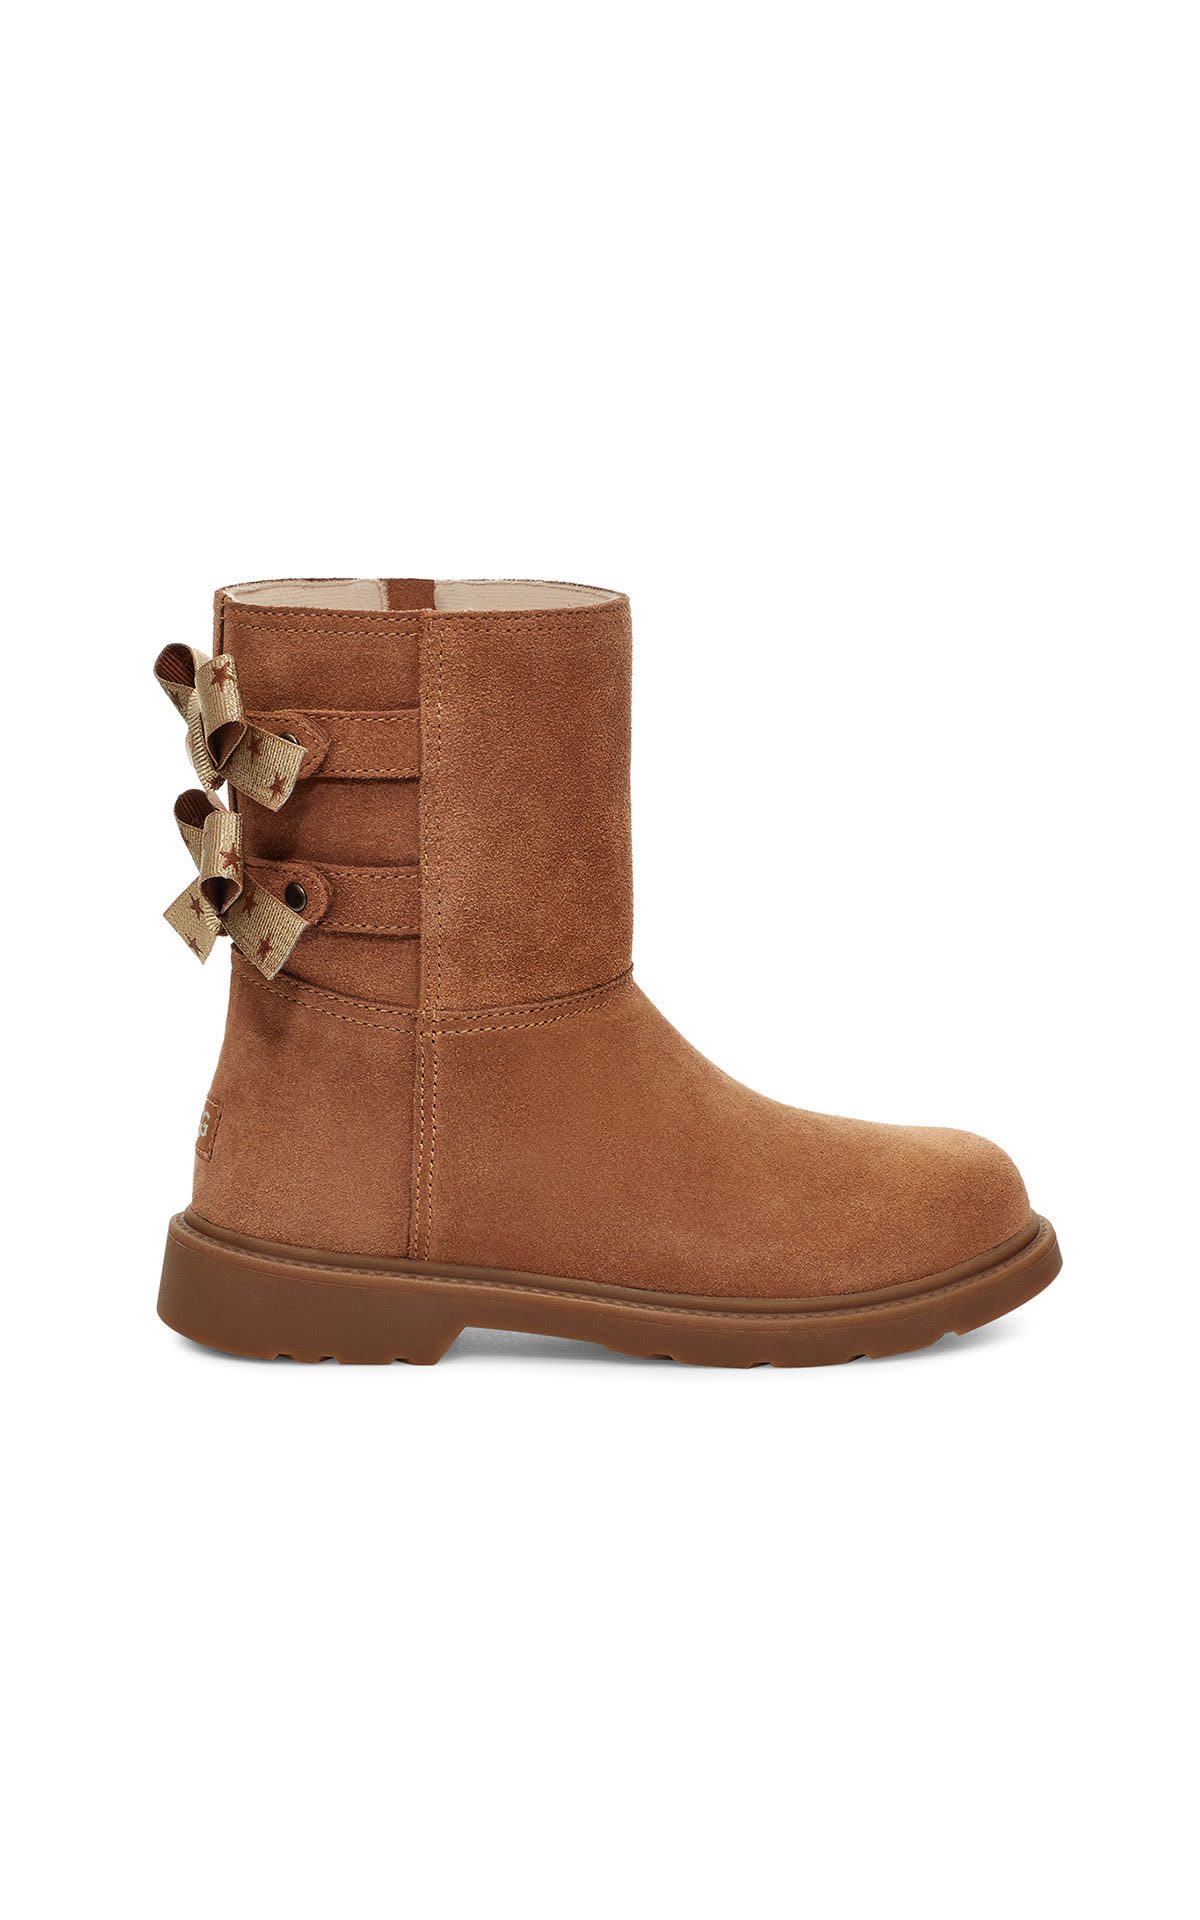 UGG Brown boot with back lace detail